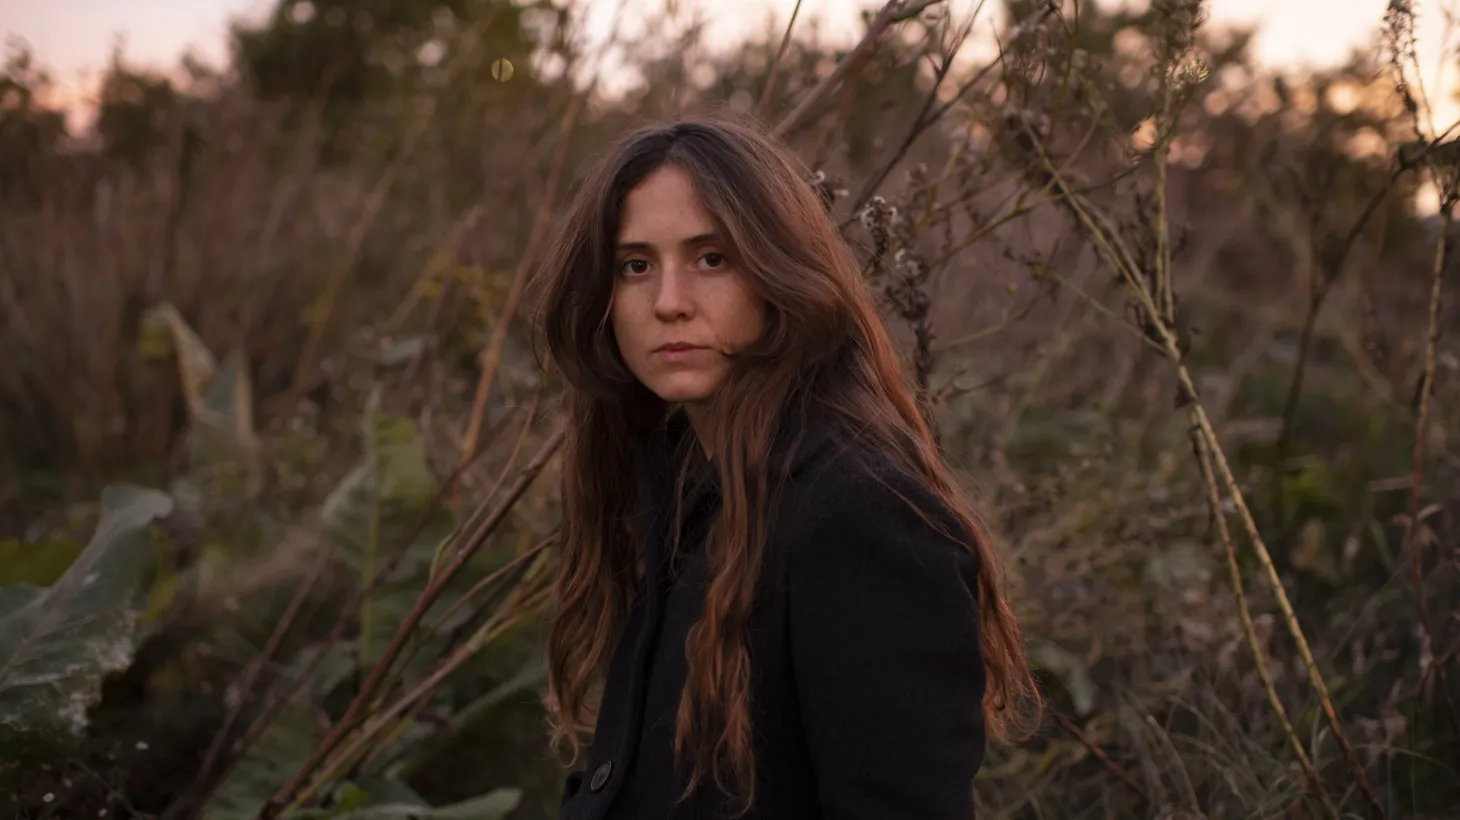 Texas fiction writer and teacher Jana Horn turned her prose into song on her solo album debut, “Optimism.” Backed by members of Knife on the Water, the title track is minimalist in nature but packed with feels.